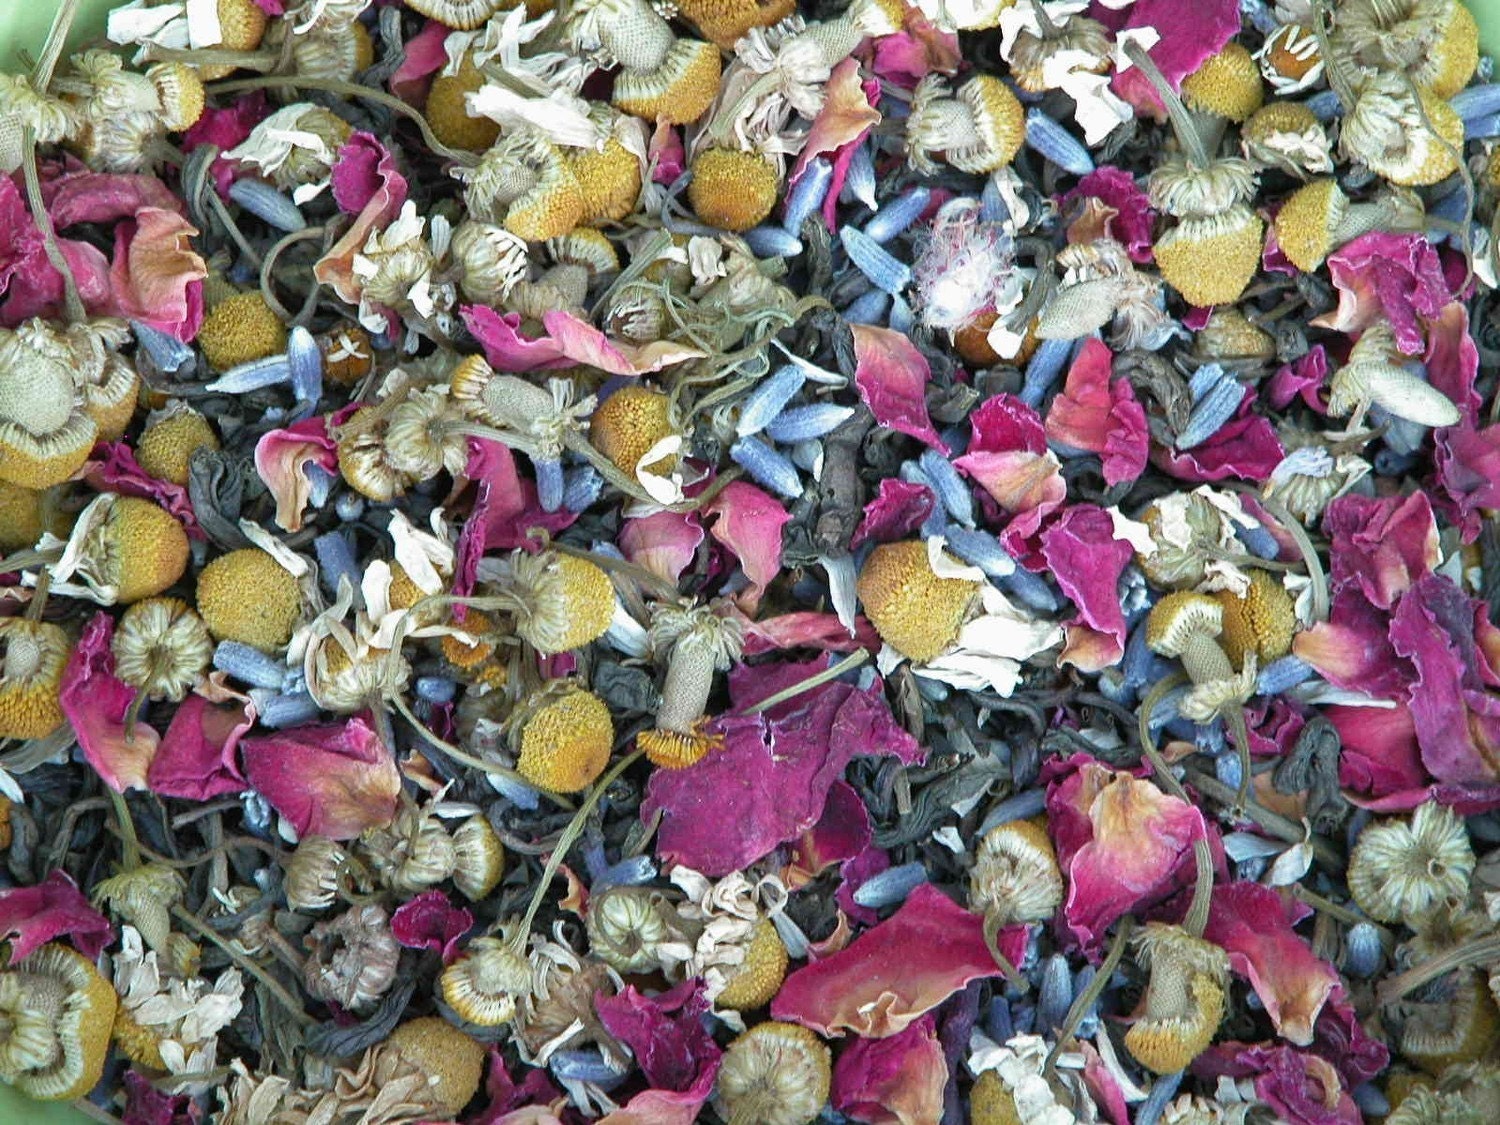 Faerie Tea . Organic All Natural Artisan Tea . For Faerie Garden Tea Parties and Working with Nature Spirits and Faeries from White Magick Alchemy